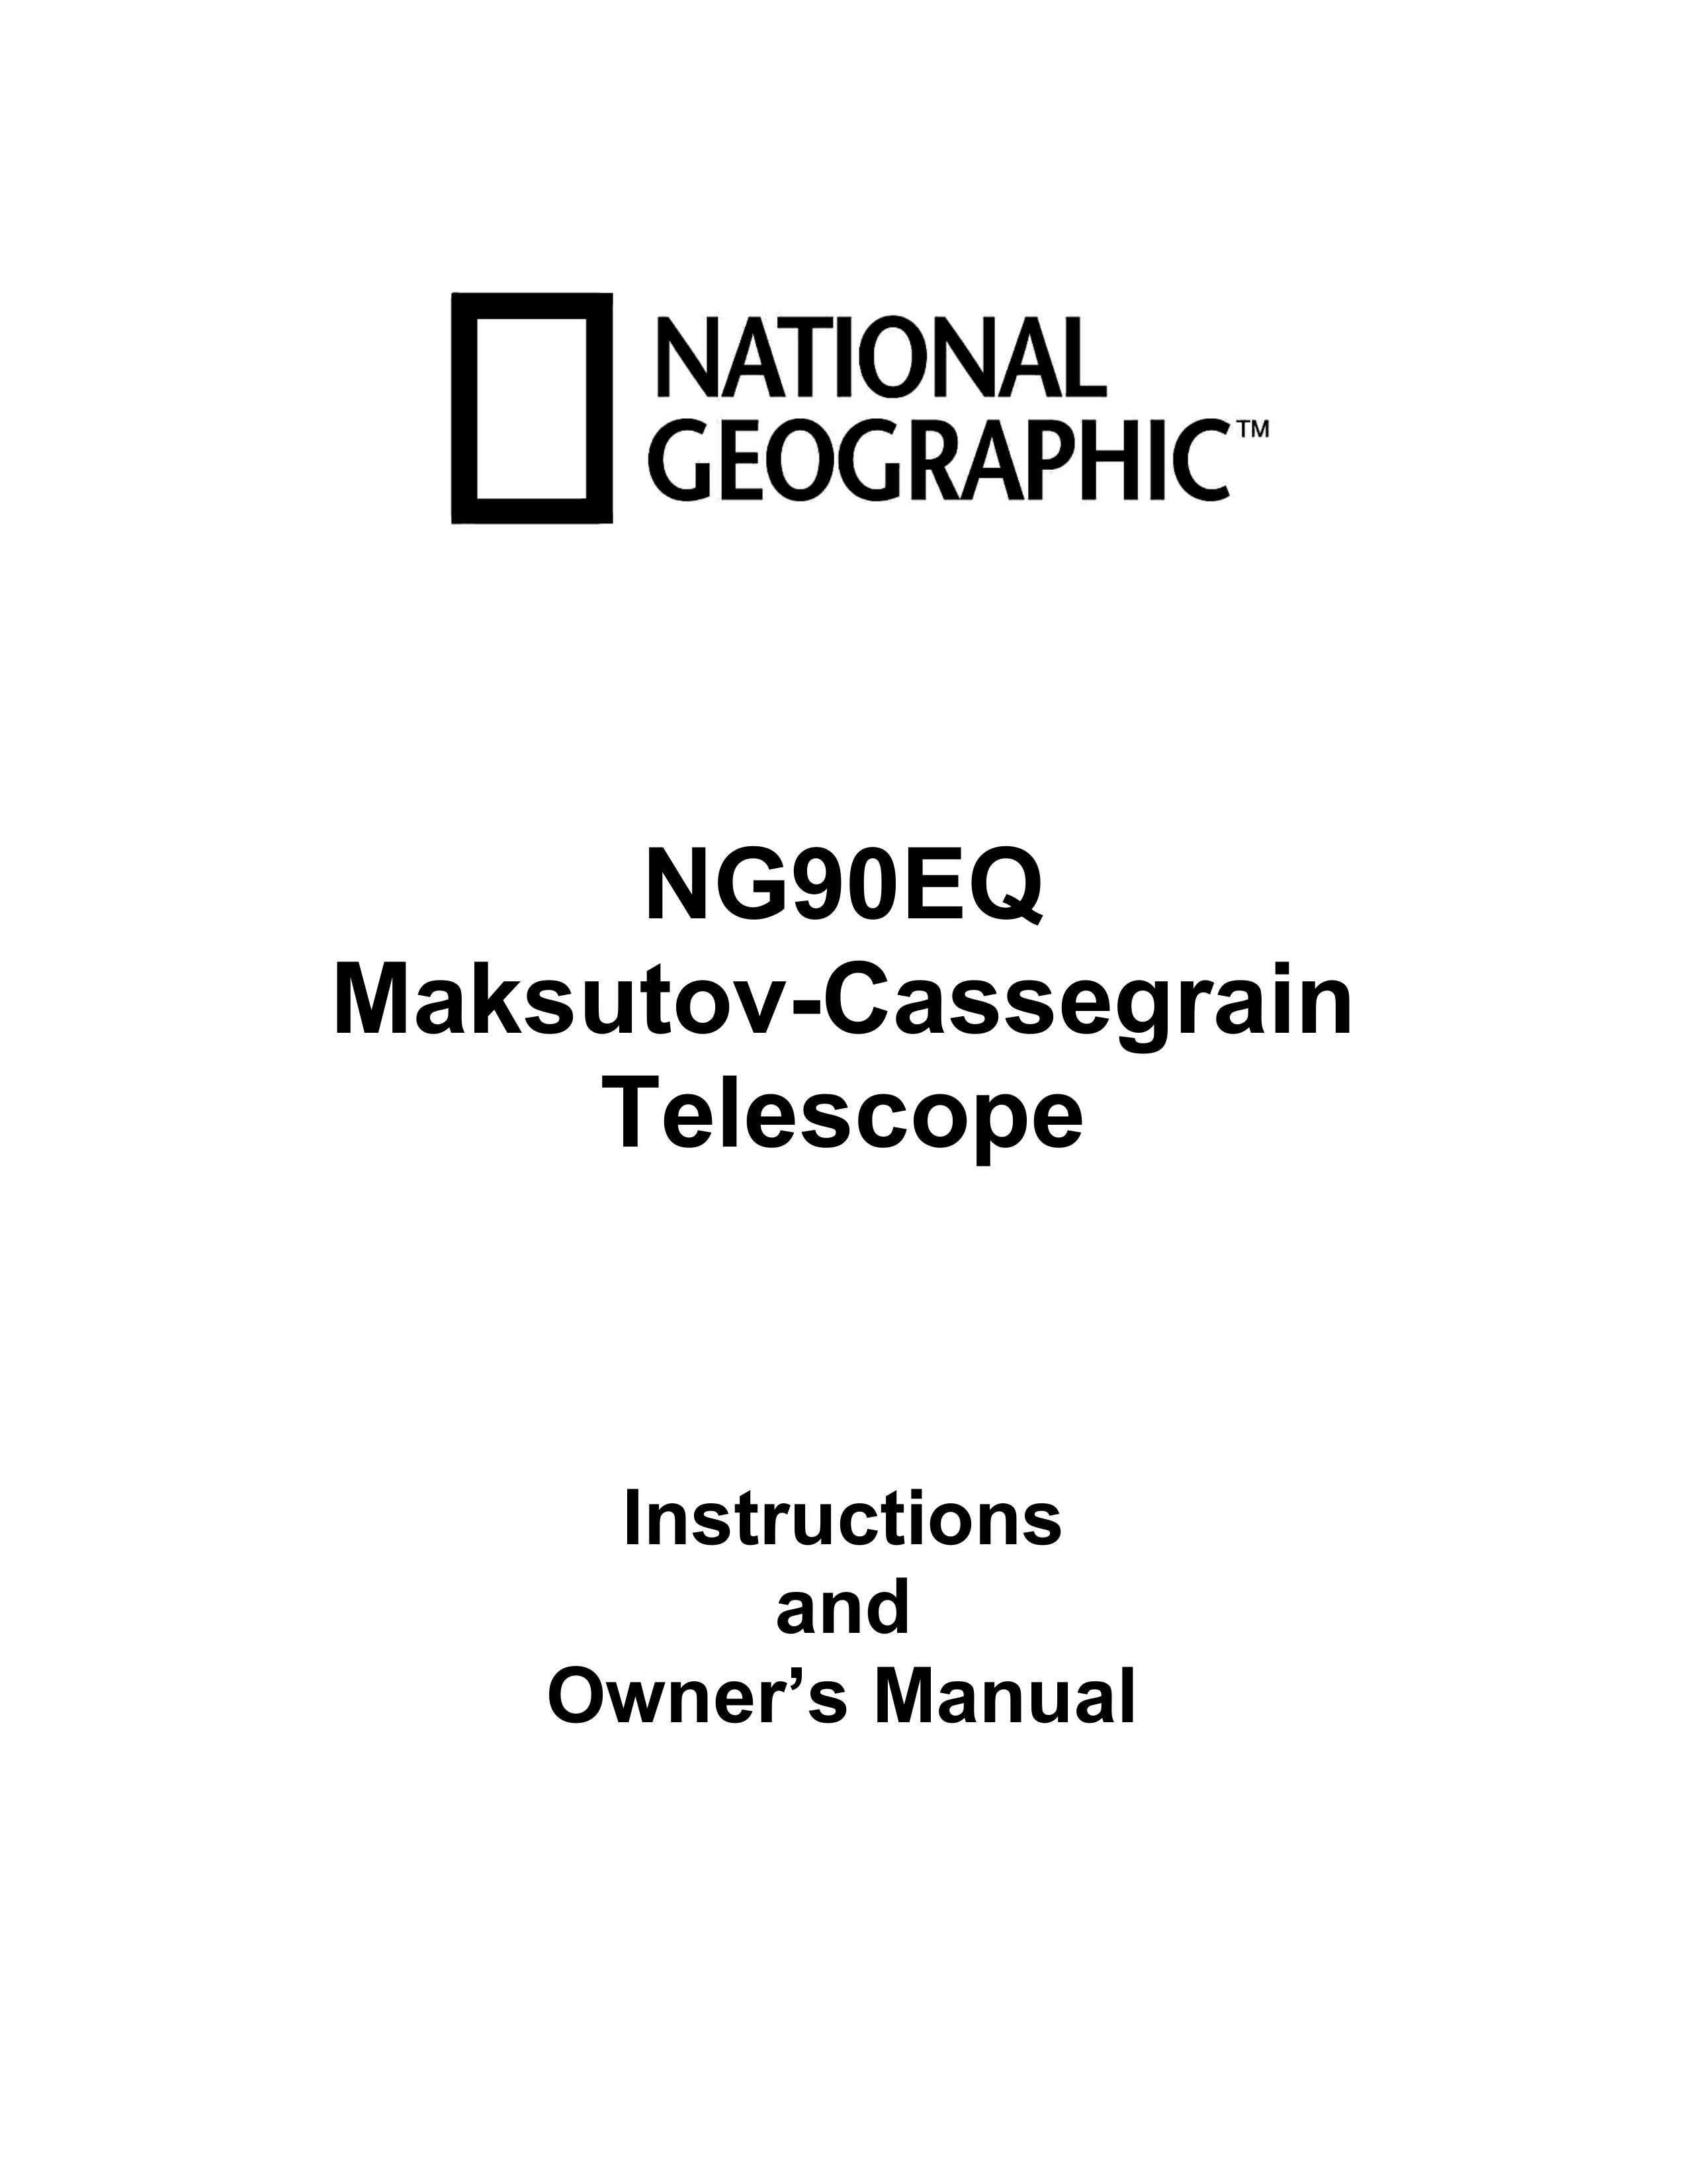 National Geographic NG90EQ Telescope User Manual